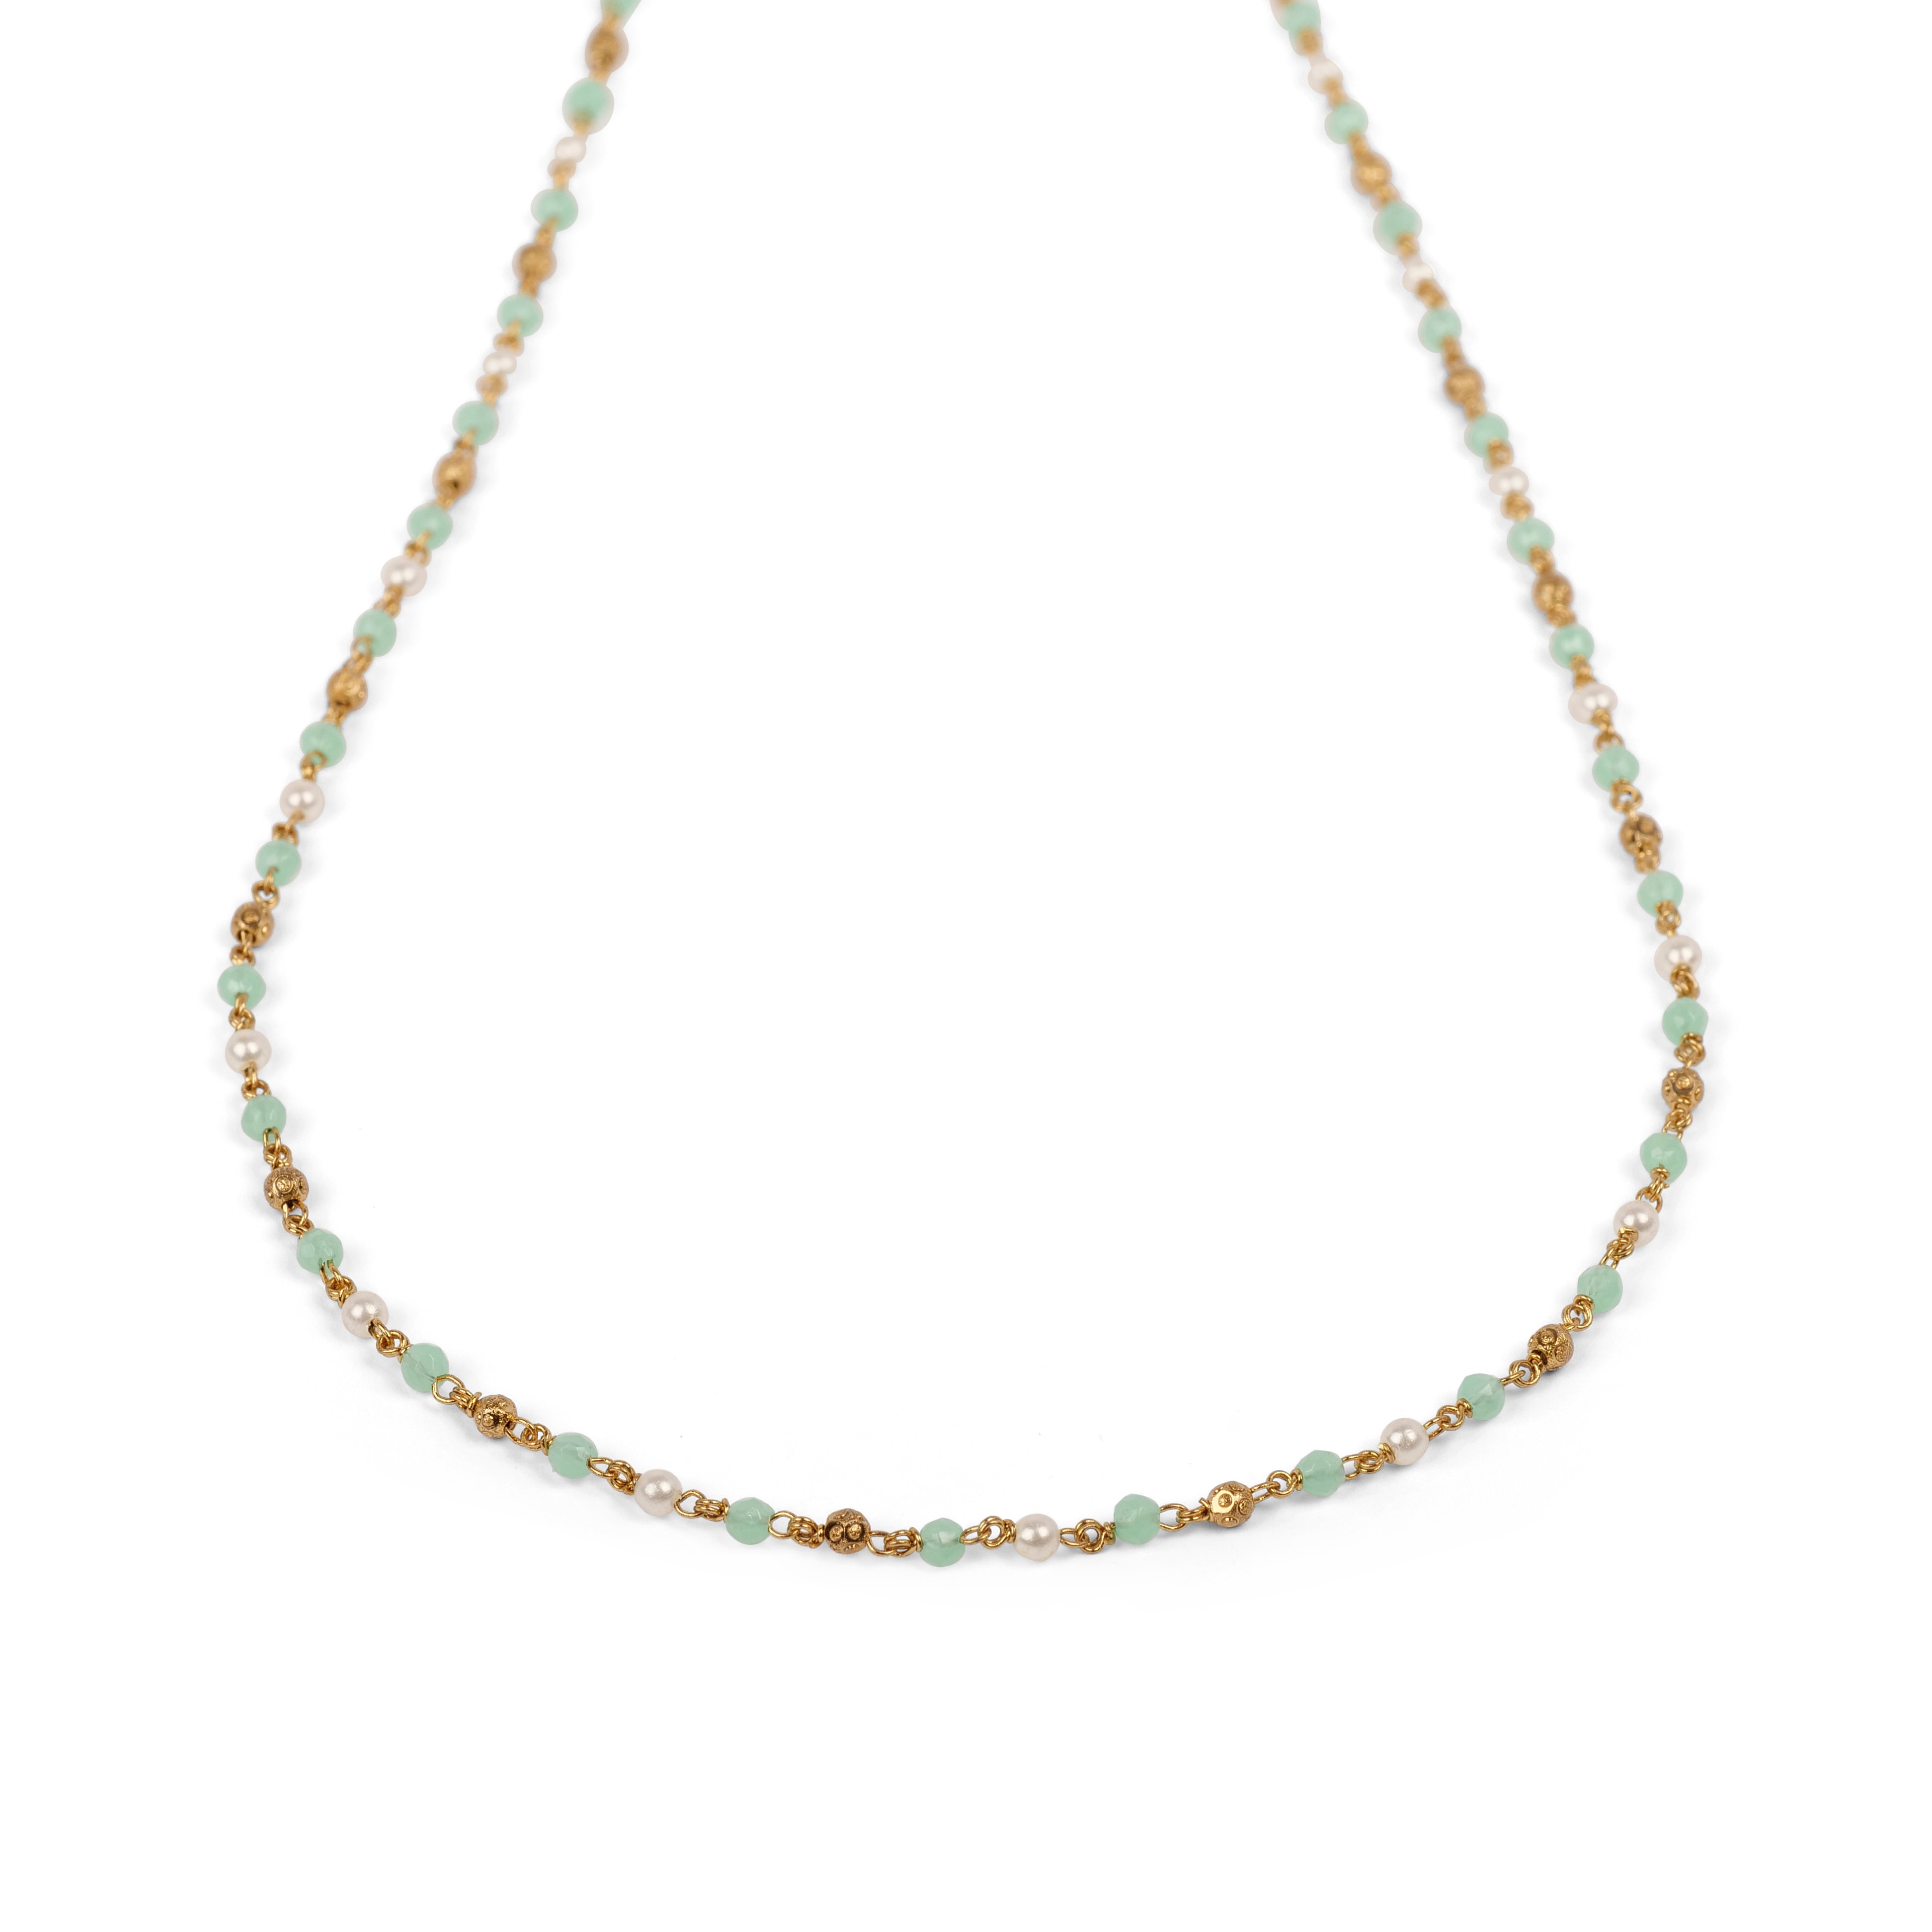 Cora Beaded Chain in Mint